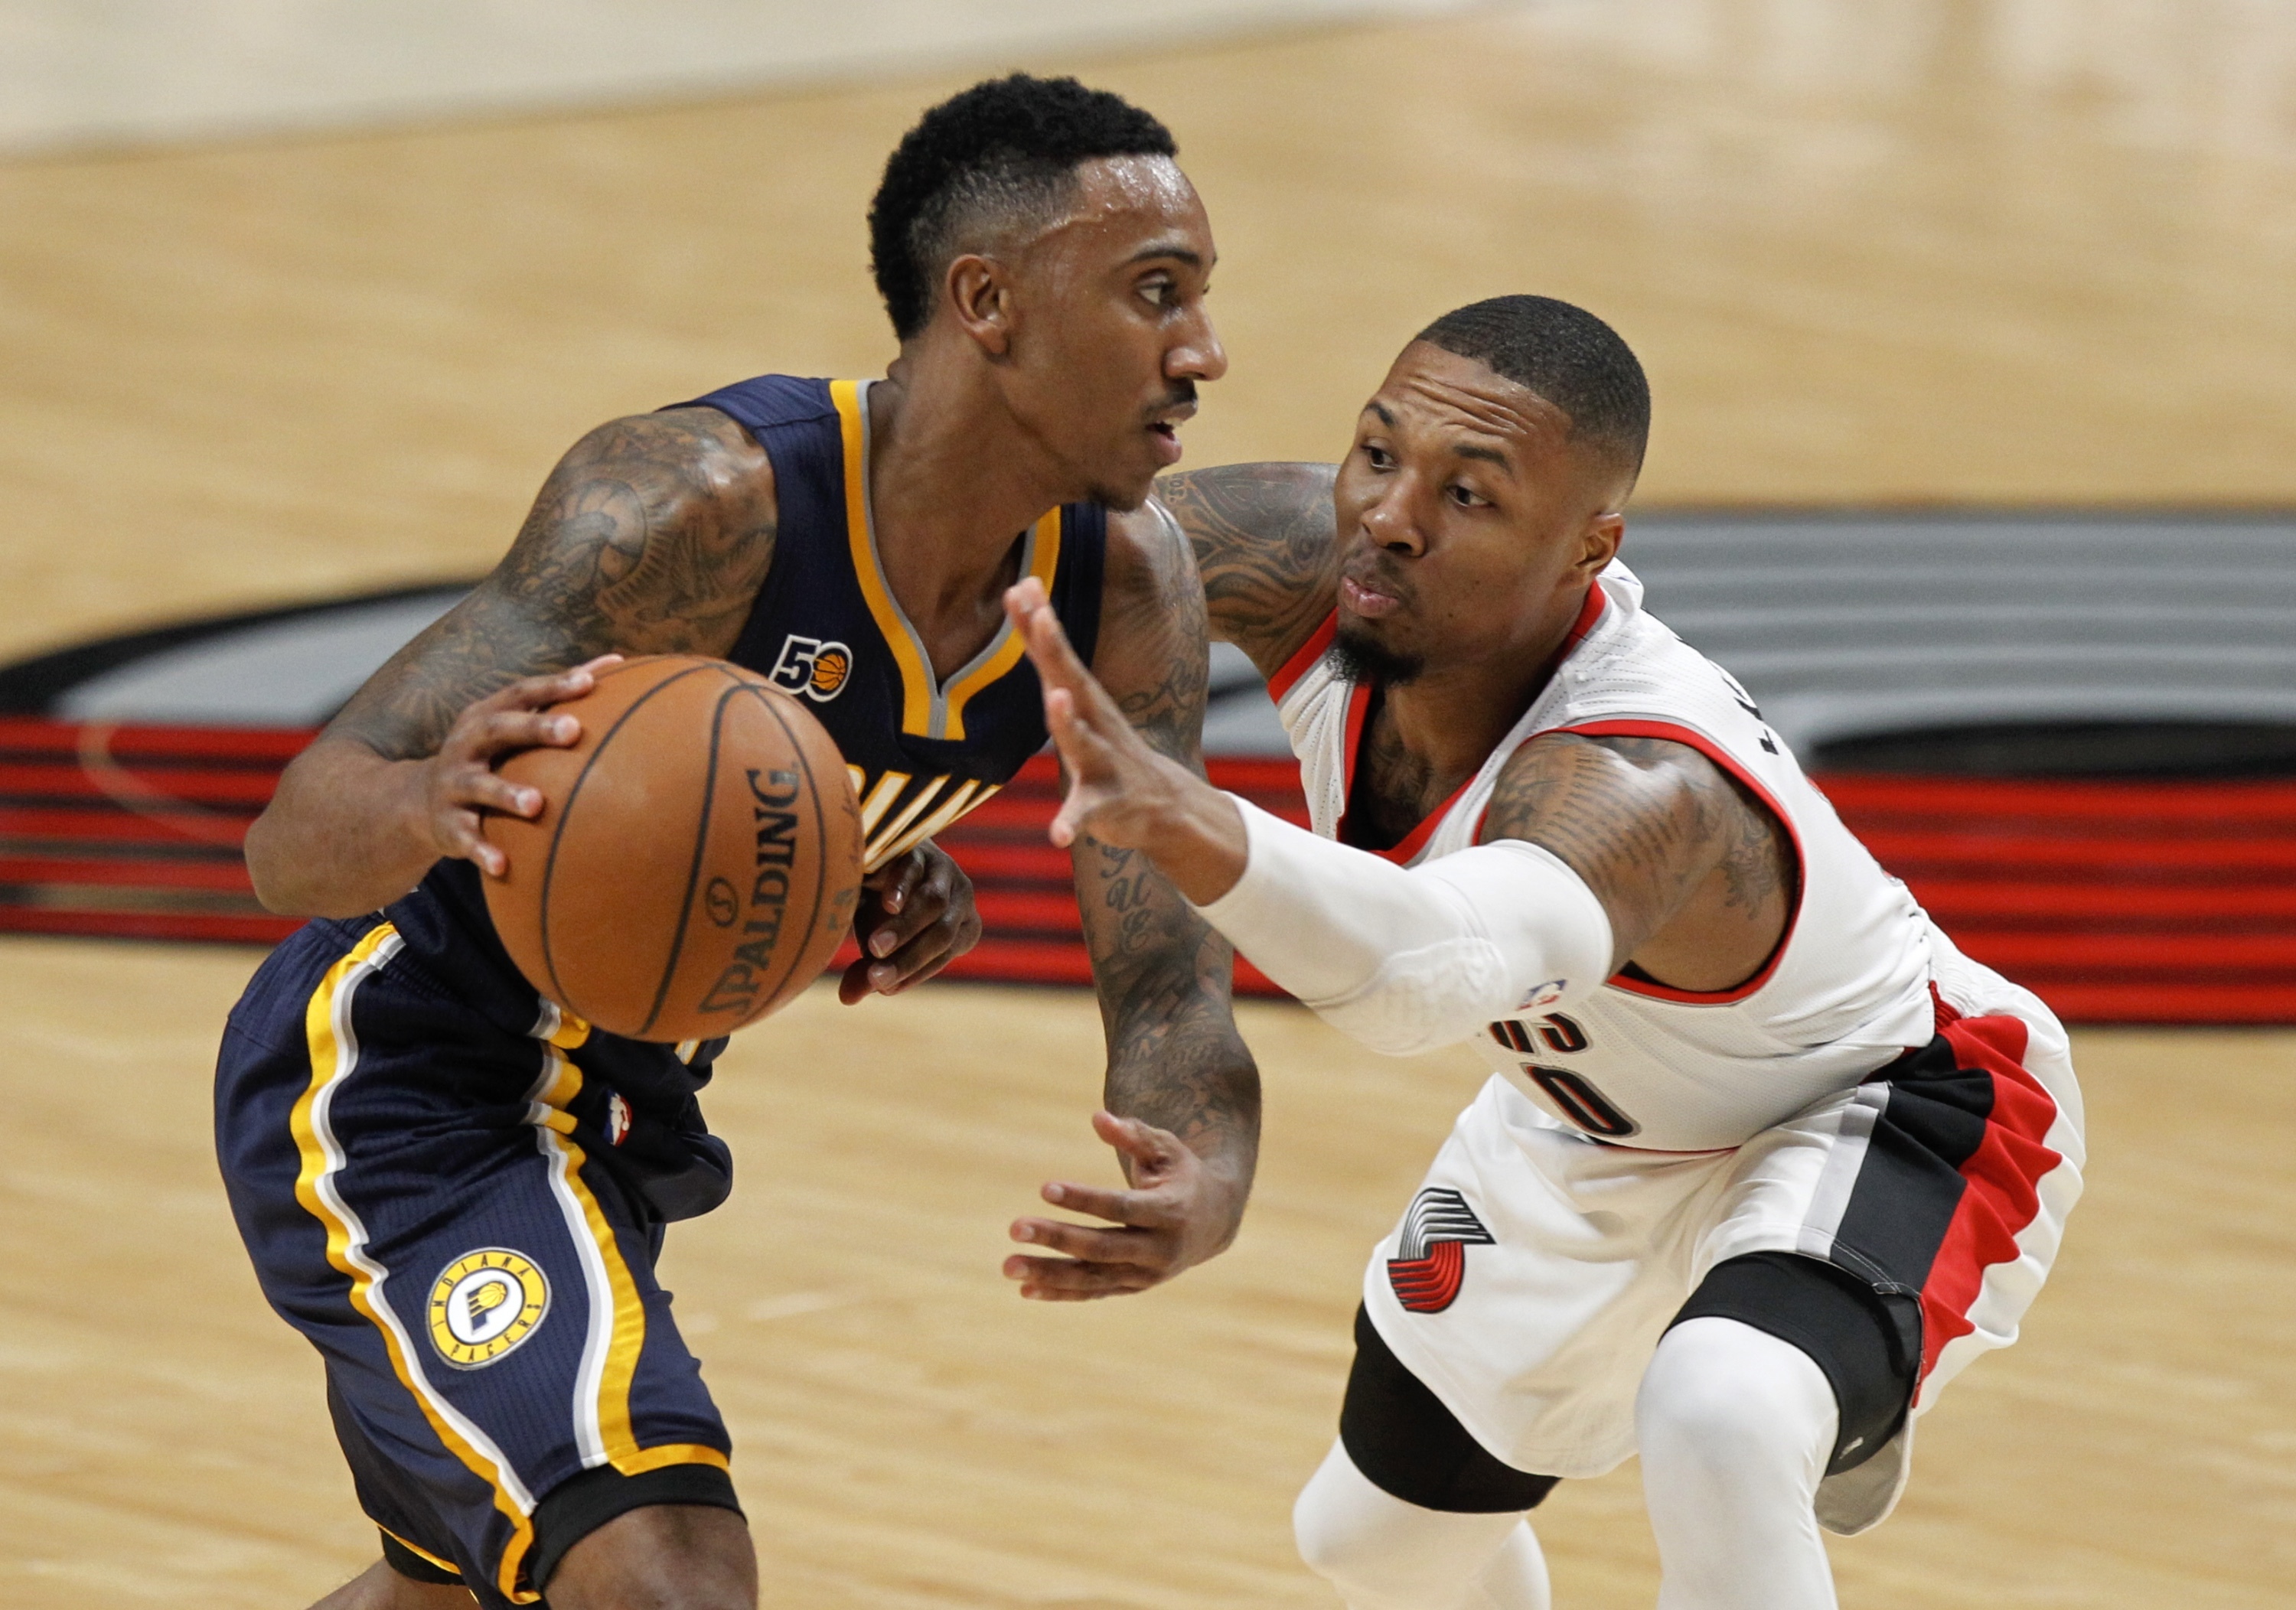 Indiana Pacers guard Jeff Teague, left, drives against Portland Trail Blazers guard Damian Lillard during the first half of an NBA basketball game in Portland, Ore., Wednesday, Nov. 30, 2016. AP